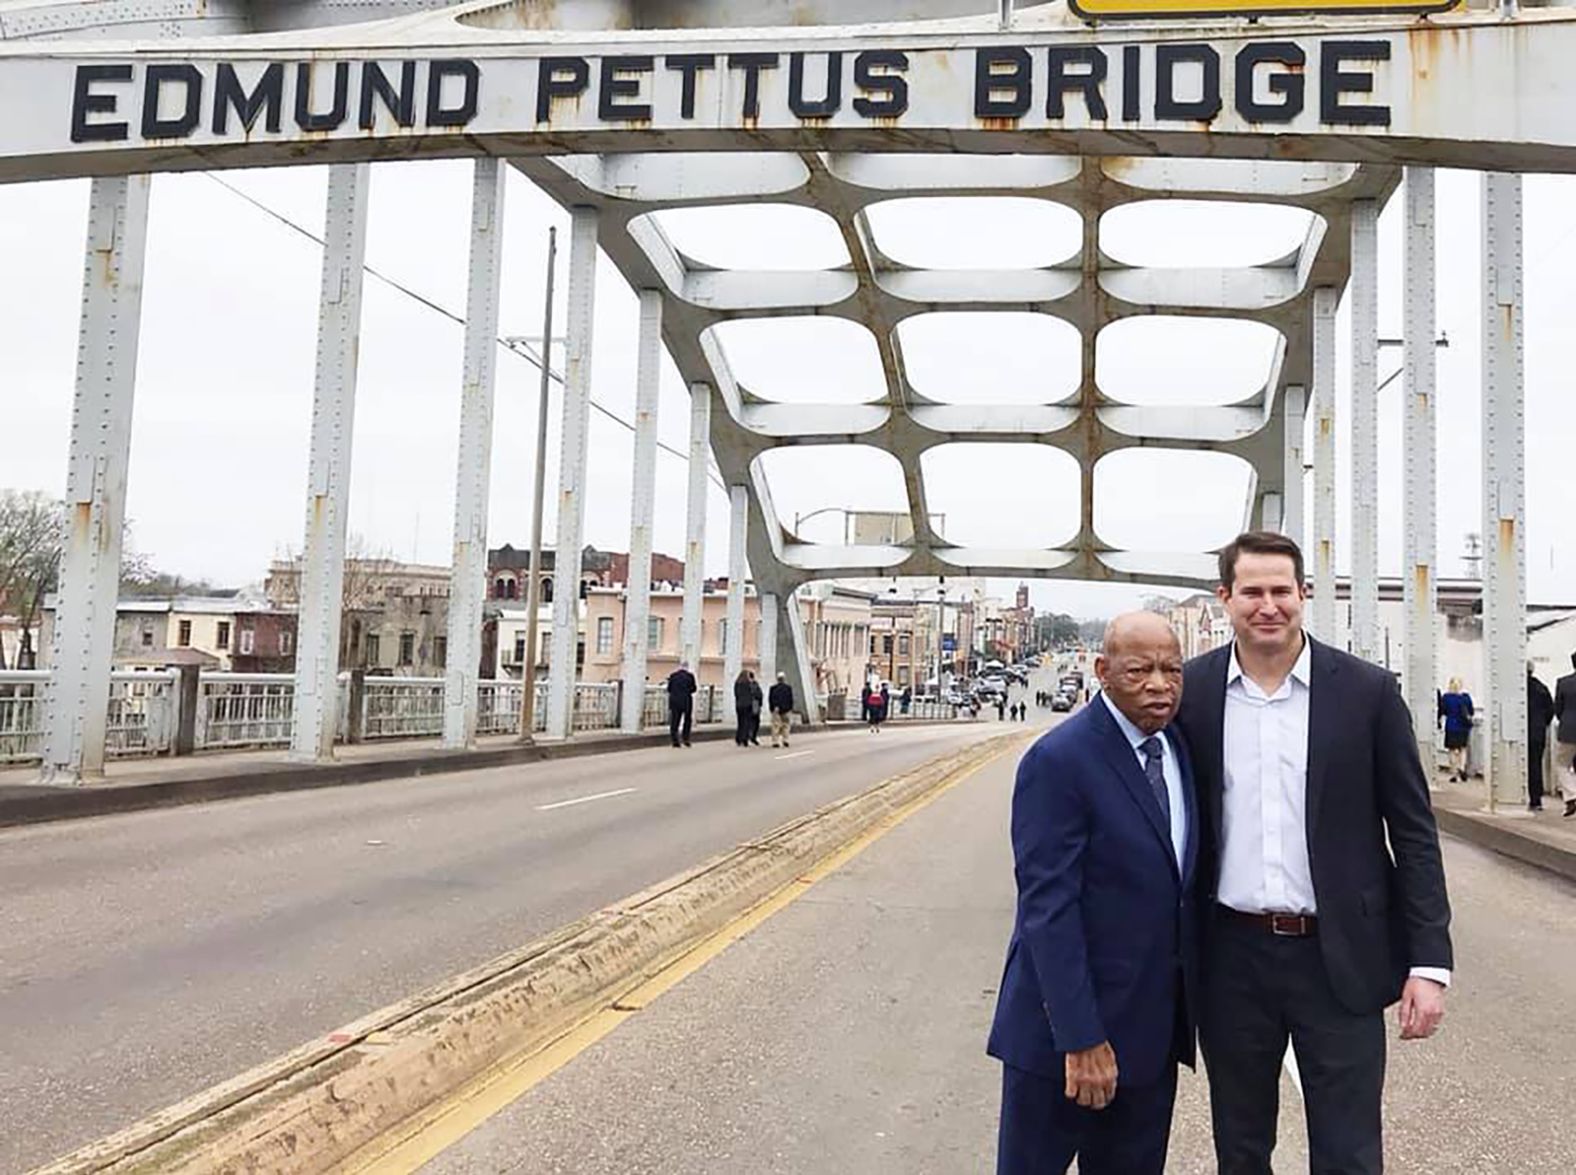 Moulton poses with US Rep. John Lewis, a civil rights icon, in Selma, Alabama, in March 2019. "After 54 years, John Lewis is still walking across Edmund Pettus Bridge in the name of freedom and equality," <a href="index.php?page=&url=https%3A%2F%2Fwww.facebook.com%2FSethMoulton%2Fphotos%2Fa.367186863420256%2F1320631628075770%2F%3Ftype%3D3%26theater" target="_blank" target="_blank">Moulton said on Facebook.</a> "Today I was proud to walk with him."